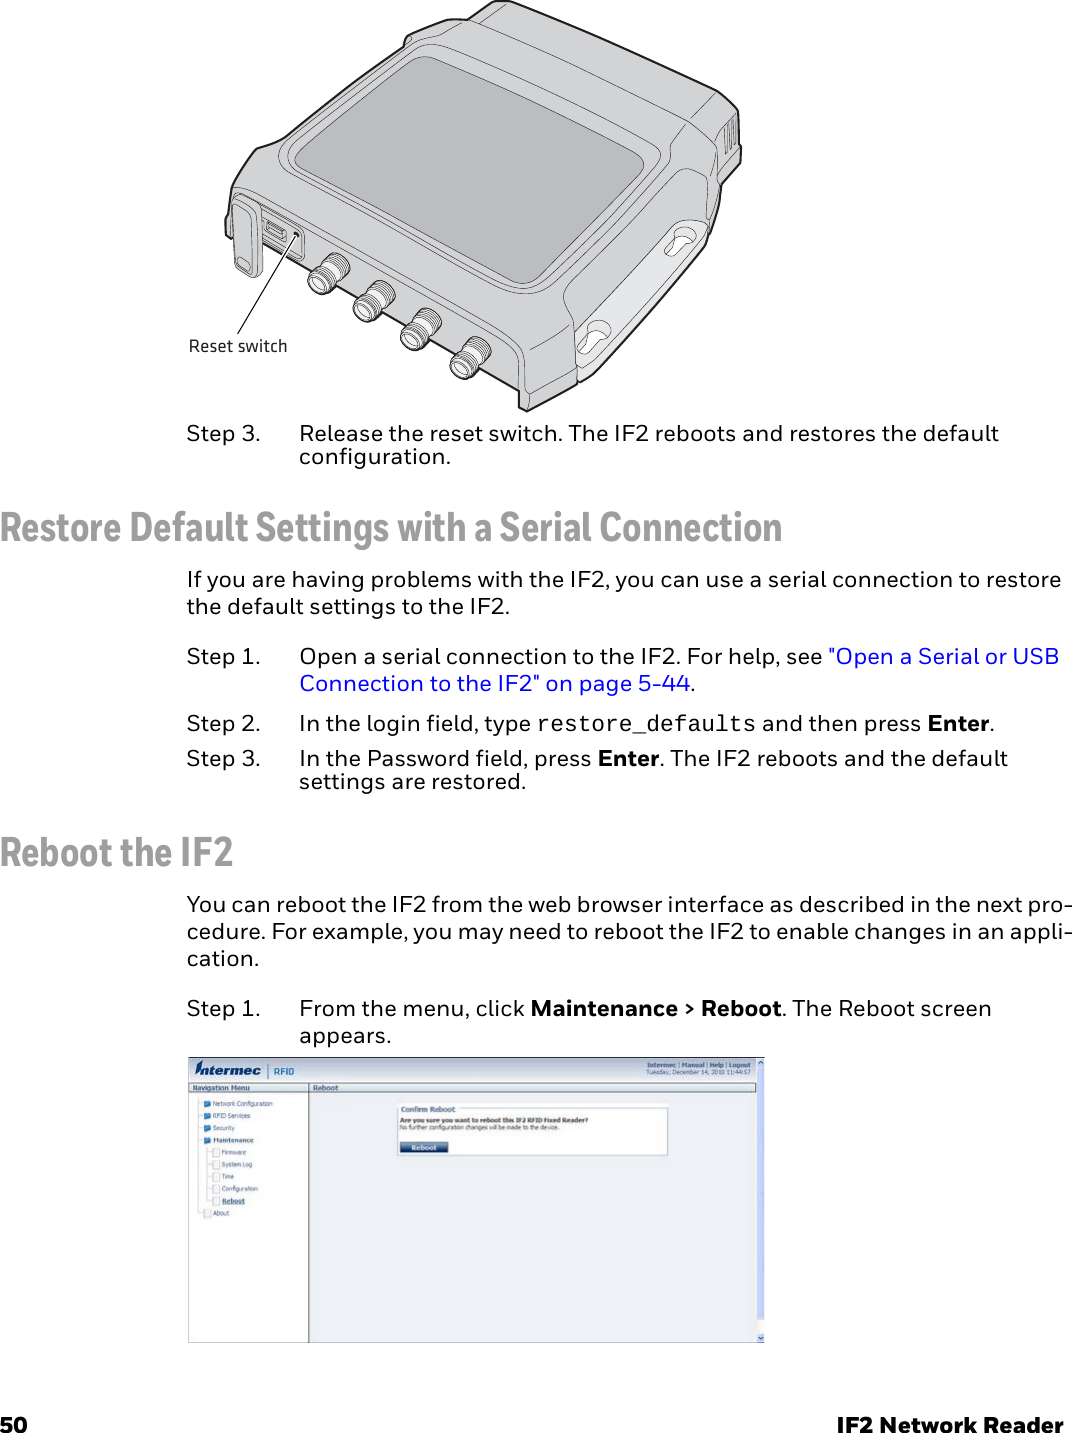 50 IF2 Network ReaderStep 3. Release the reset switch. The IF2 reboots and restores the default configuration.Restore Default Settings with a Serial ConnectionIf you are having problems with the IF2, you can use a serial connection to restore the default settings to the IF2.Step 1. Open a serial connection to the IF2. For help, see &quot;Open a Serial or USB Connection to the IF2&quot; on page 5-44.Step 2. In the login field, type restore_defaults and then press Enter.Step 3. In the Password field, press Enter. The IF2 reboots and the default settings are restored.Reboot the IF2You can reboot the IF2 from the web browser interface as described in the next pro-cedure. For example, you may need to reboot the IF2 to enable changes in an appli-cation.Step 1. From the menu, click Maintenance &gt; Reboot. The Reboot screen appears.Reset switch